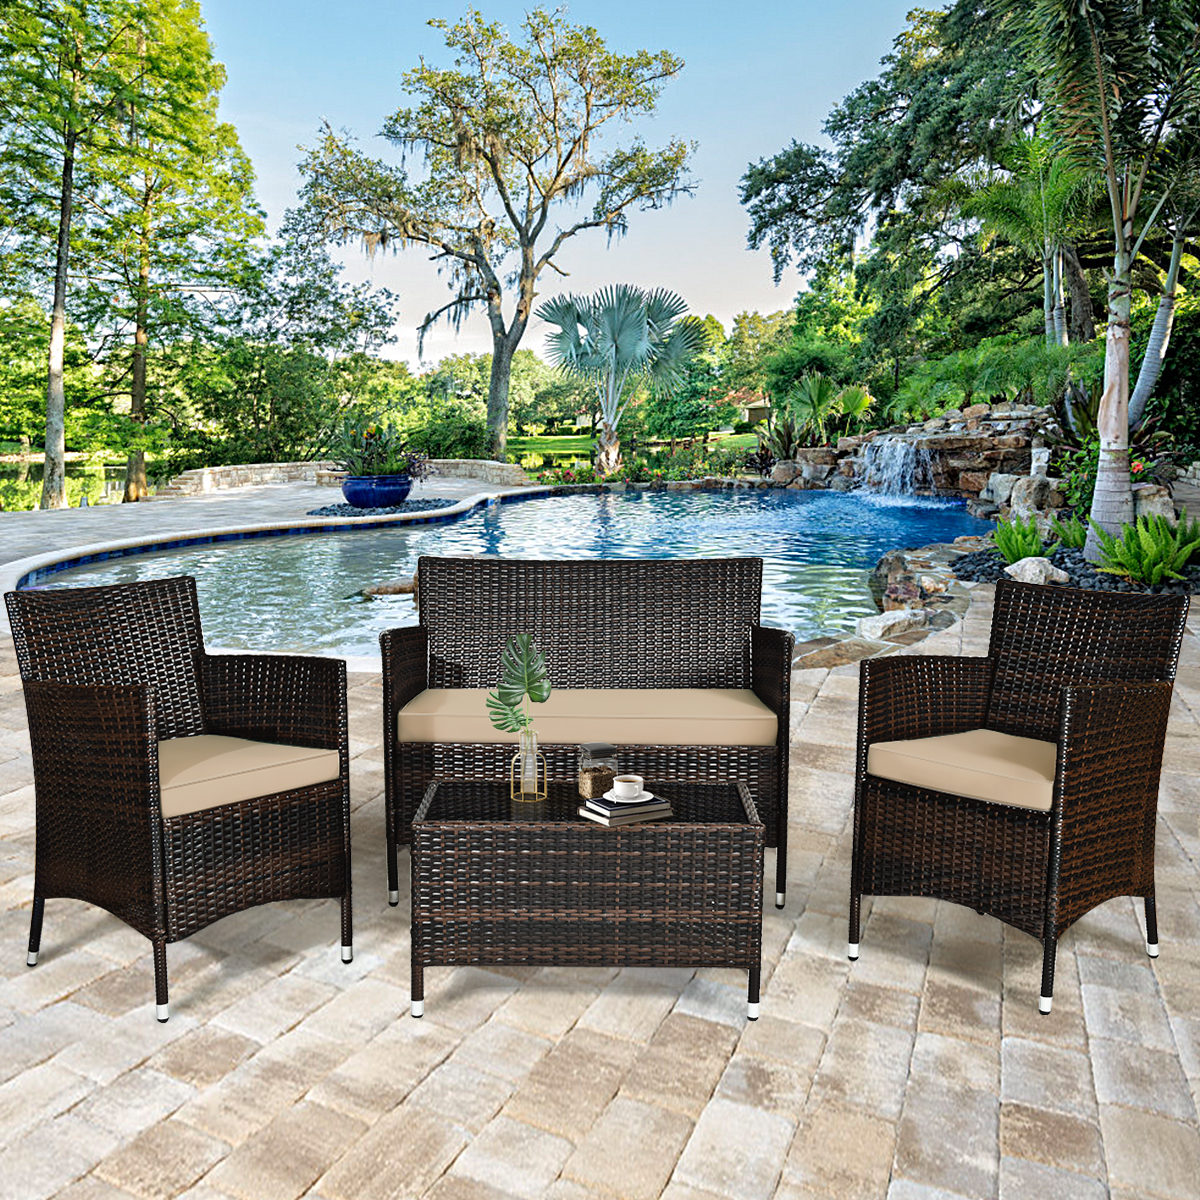 Gymax 8PCS Patio Rattan Outdoor Furniture Set w/ Cushioned Chair Loveseat Table - image 10 of 10